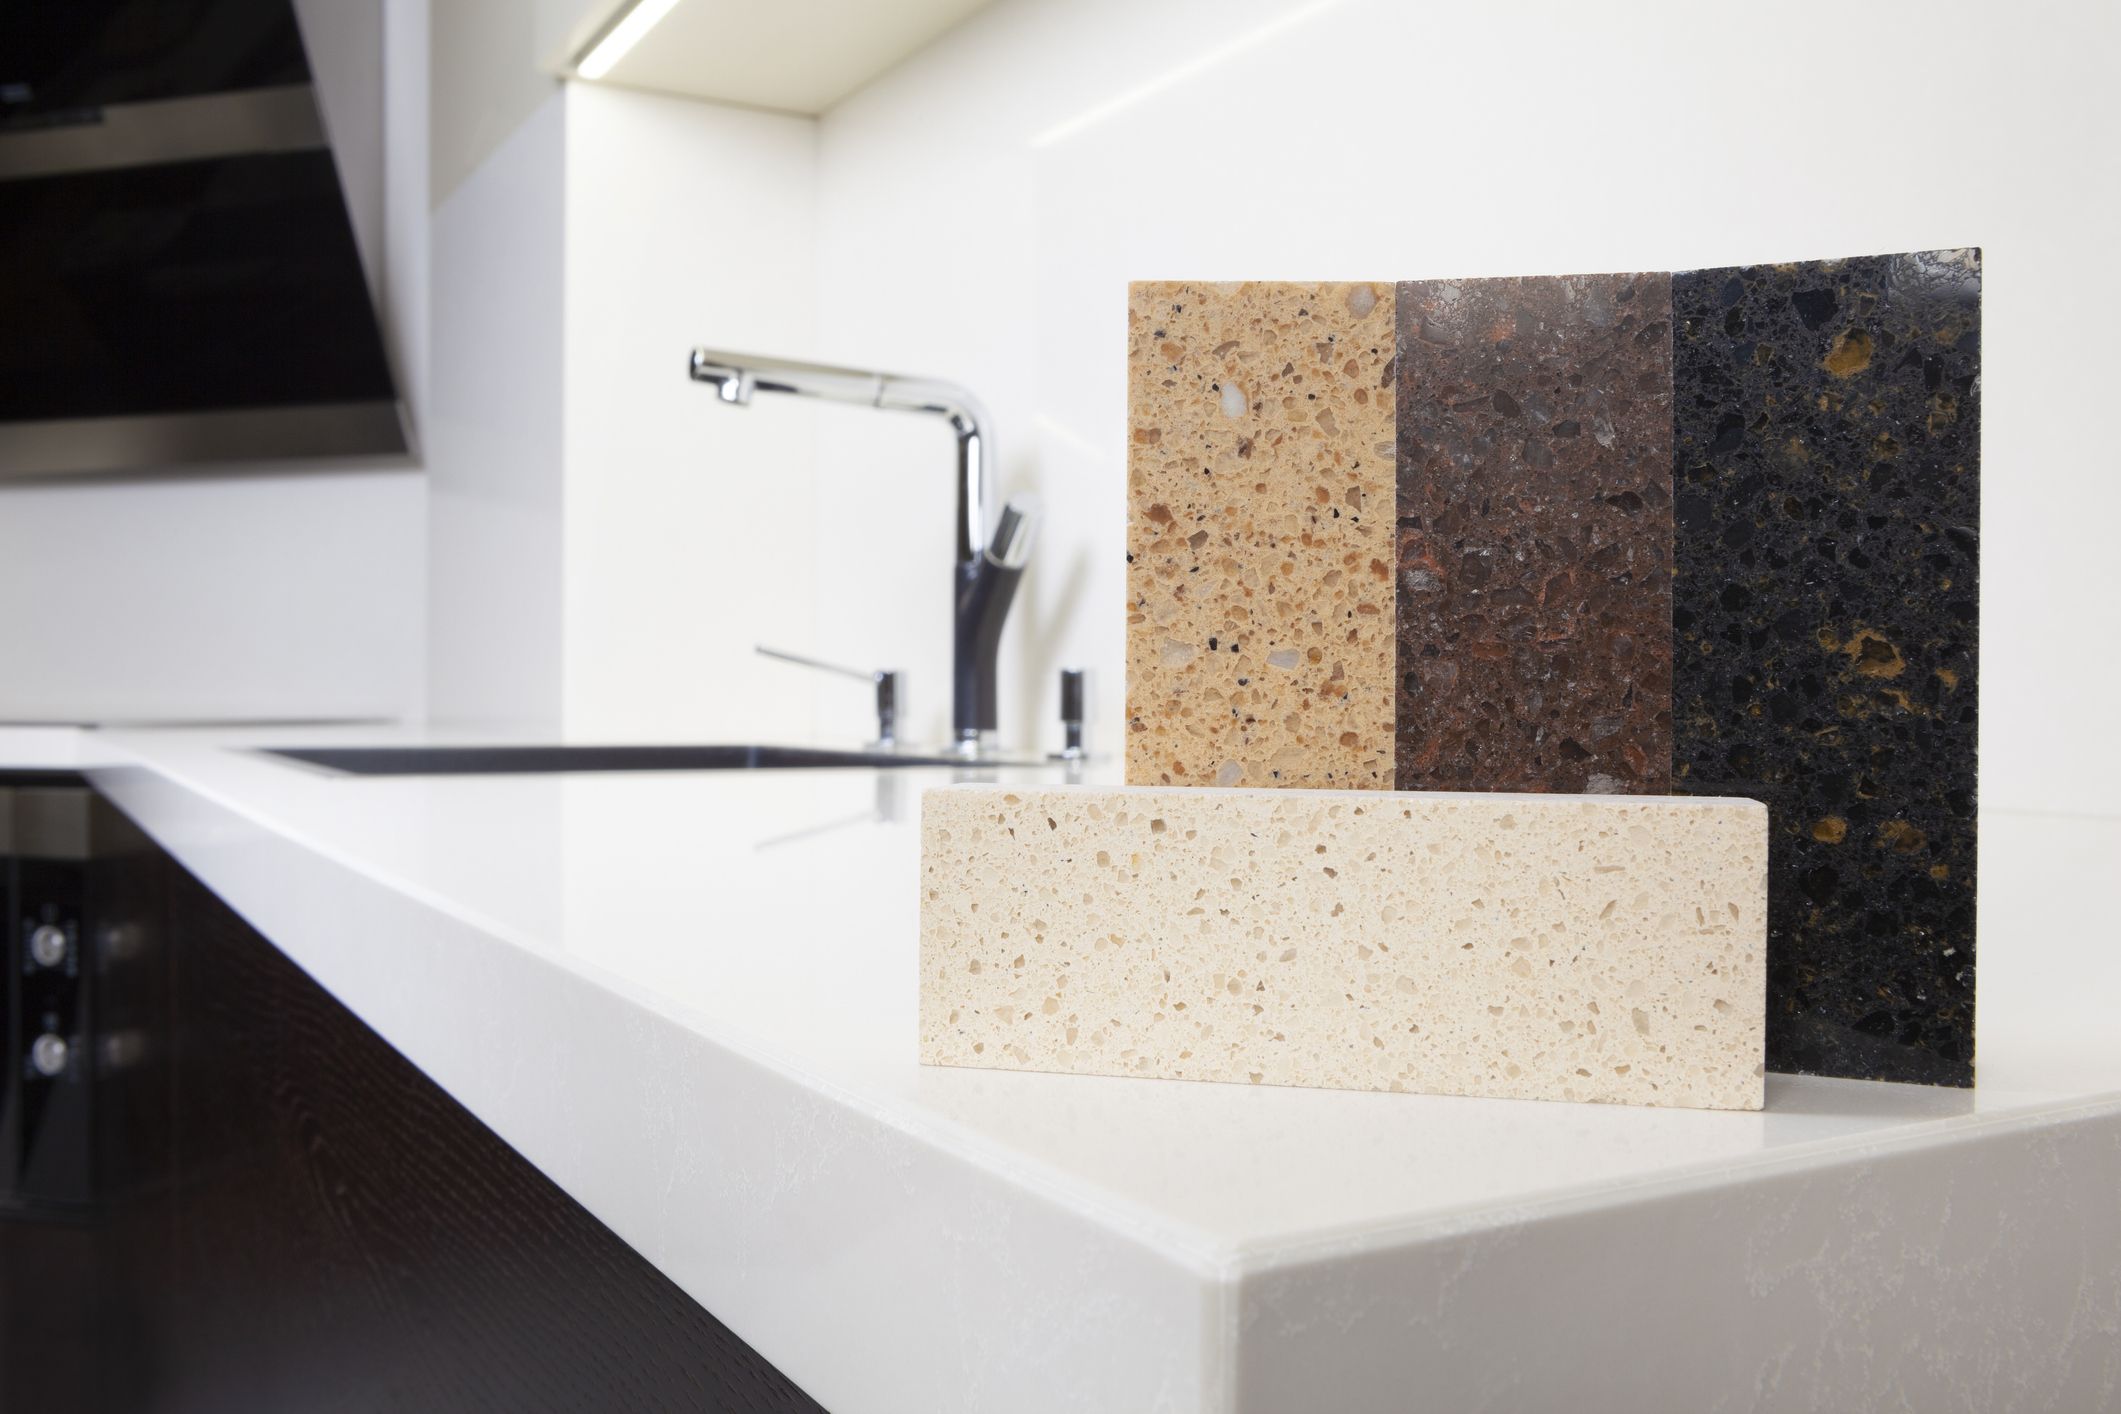 The Best Countertop Options For Kitchens, Are Quartz Countertops Shiny Like Granite